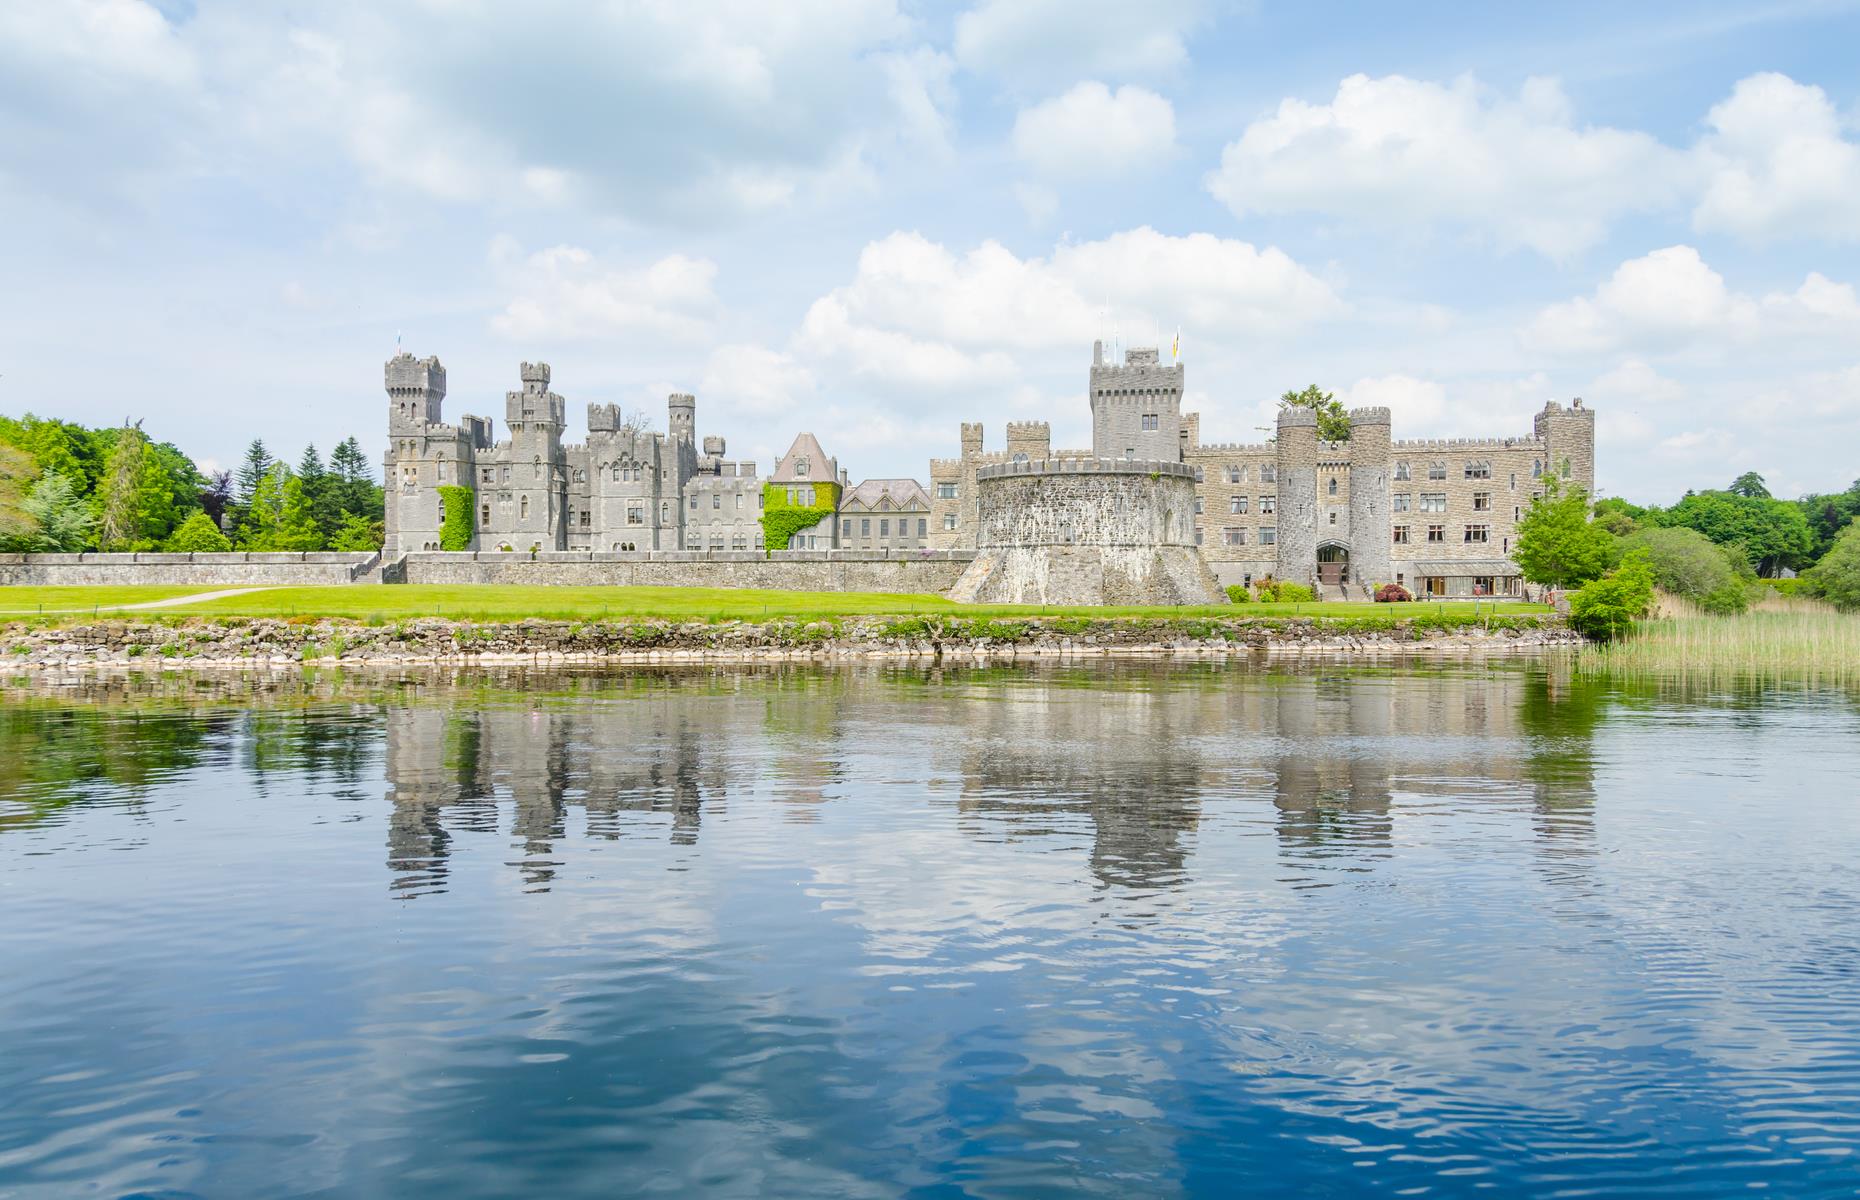 <p>Set on the edge of Loch Corrib, centuries-old Ashford Castle will tick all the kids' fairy-tale fantasy boxes. Little ones will love following fairy paths and finding Rapunzel's tower in the huge grounds. There's also tree climbing, zip lining, falconry and horse riding, as well as a cinema room and a fantastic playroom for rainy days. There's even an in-room Lego butler service, where kids pick out which Lego set they'd like to make and a butler will deliver it to their room on a silver tray... This place certainly knows how to treat its guests – both big and small.</p>